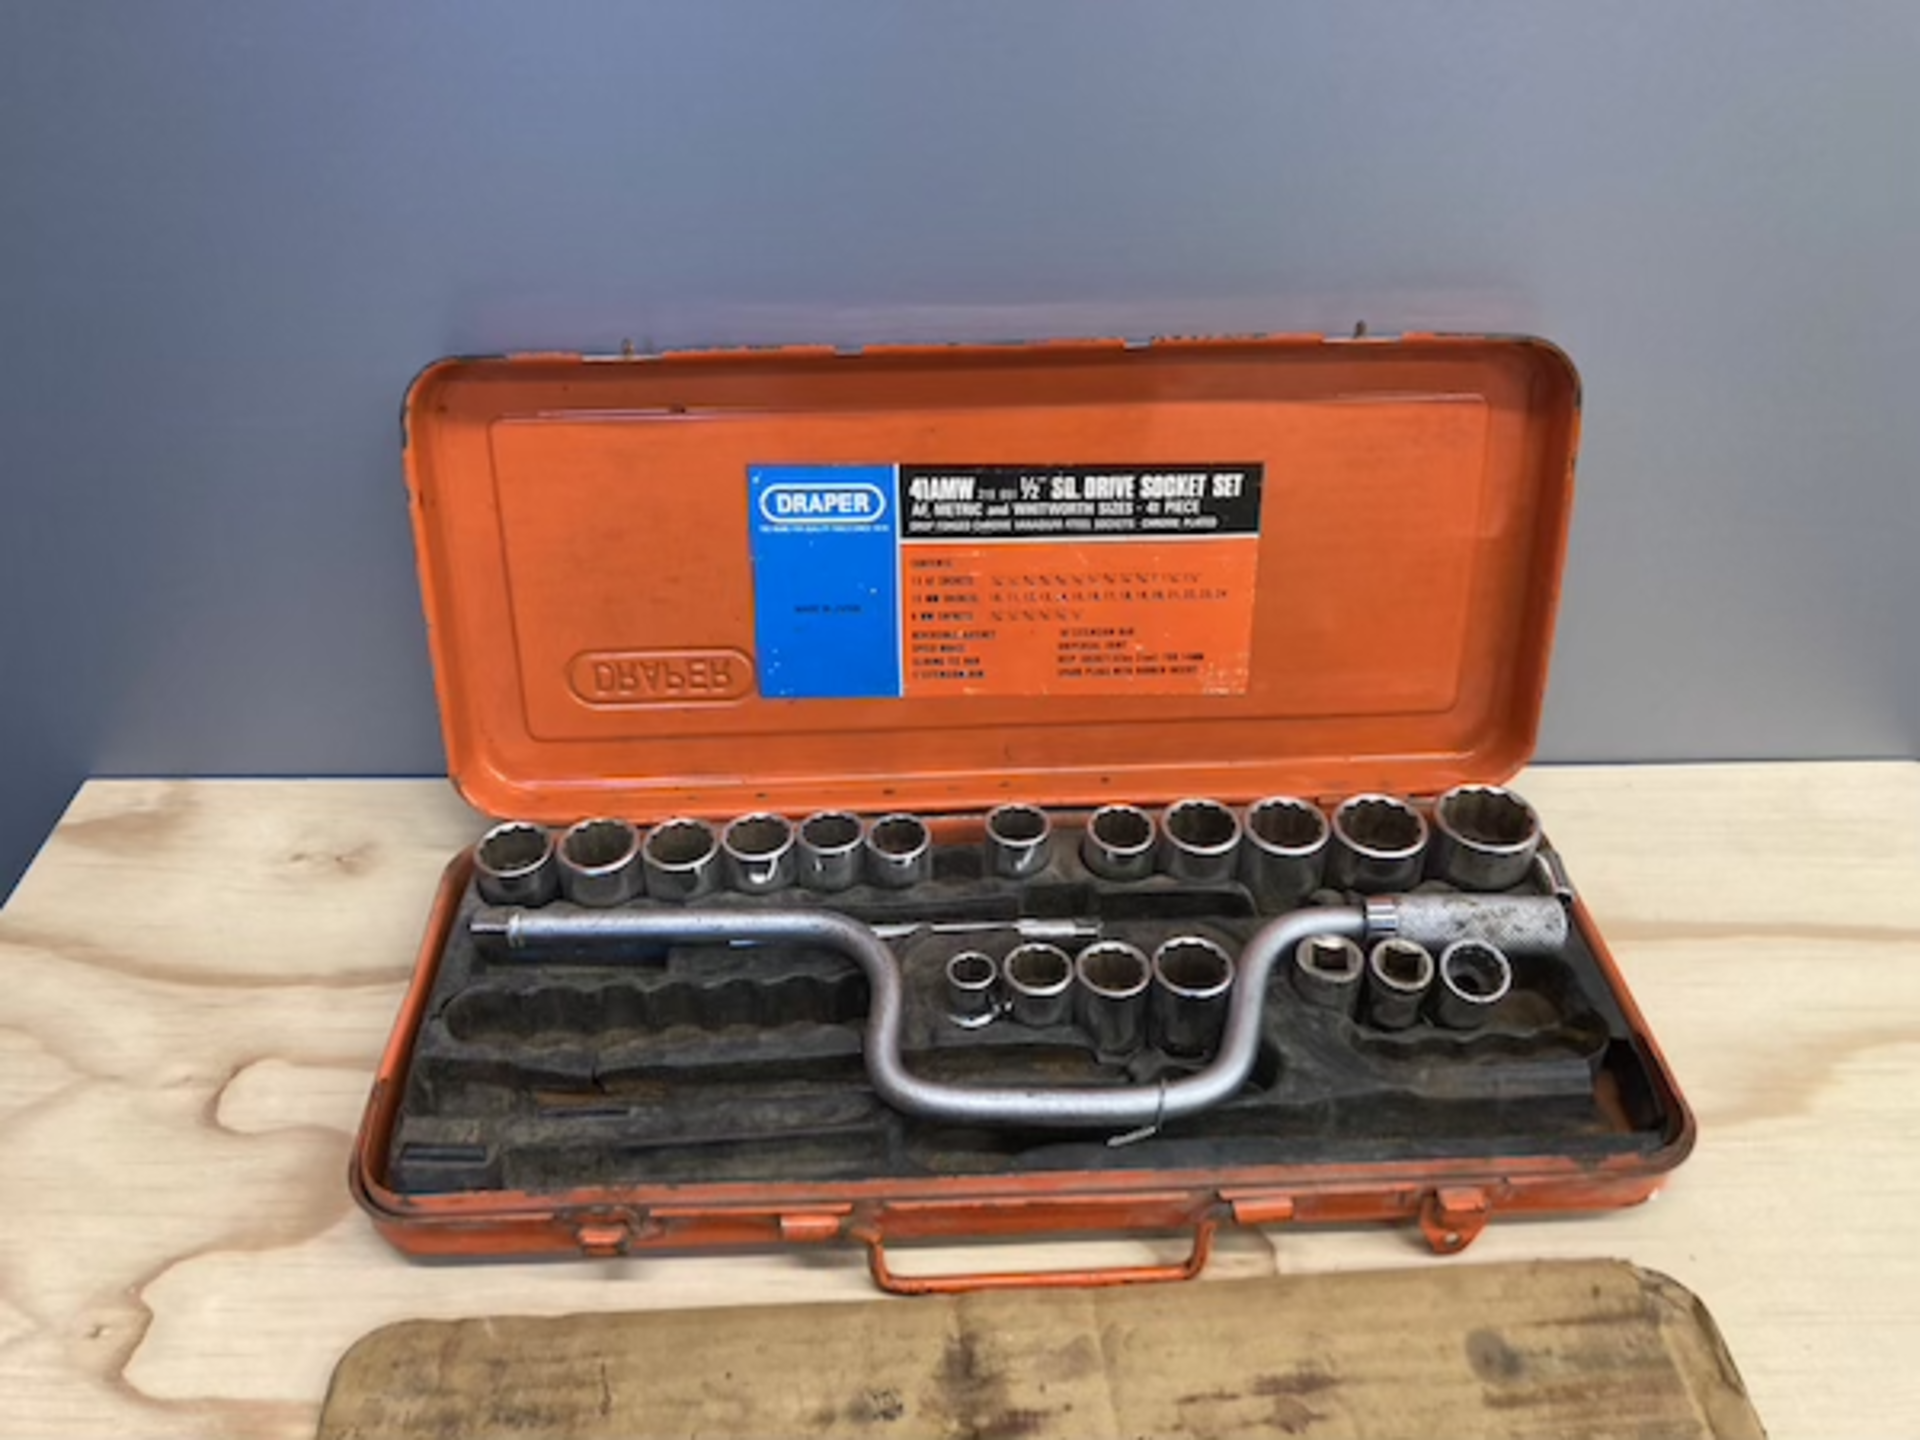 Draper 41AMW 1/2" square drive socket set (incomplete), as lotted